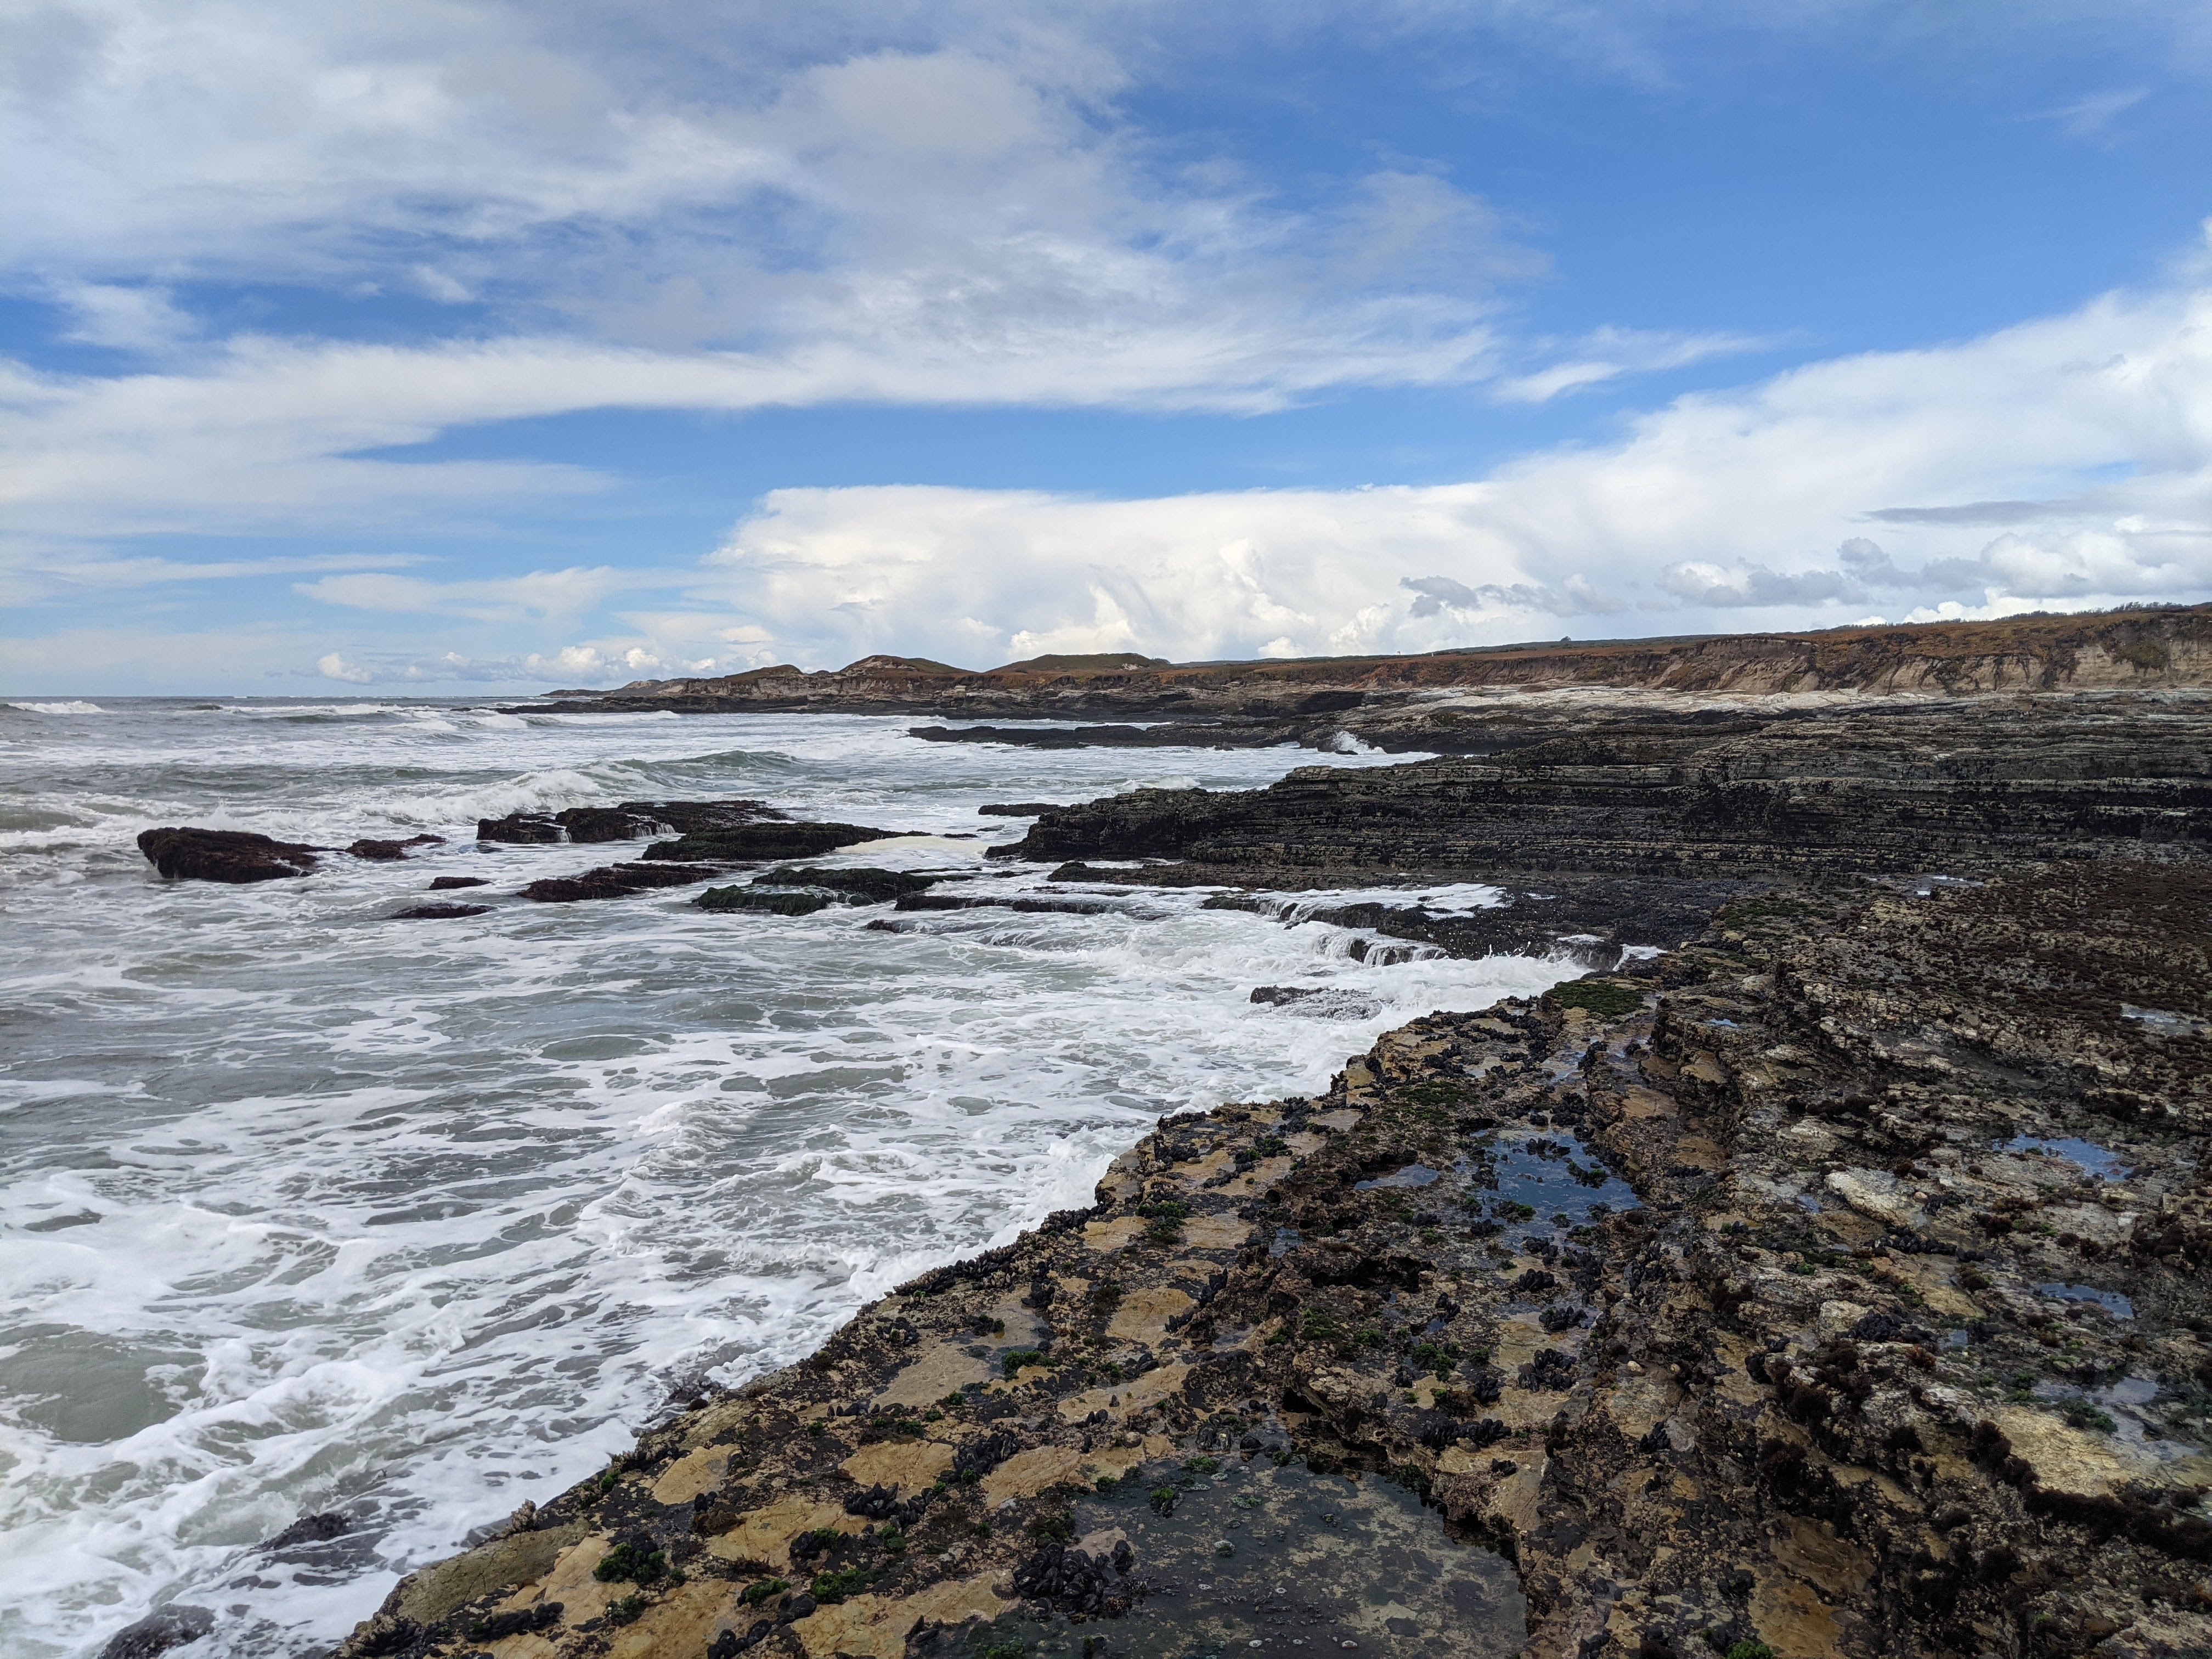 A rocky intertidal zone next to a churning ocean and cloudy sky